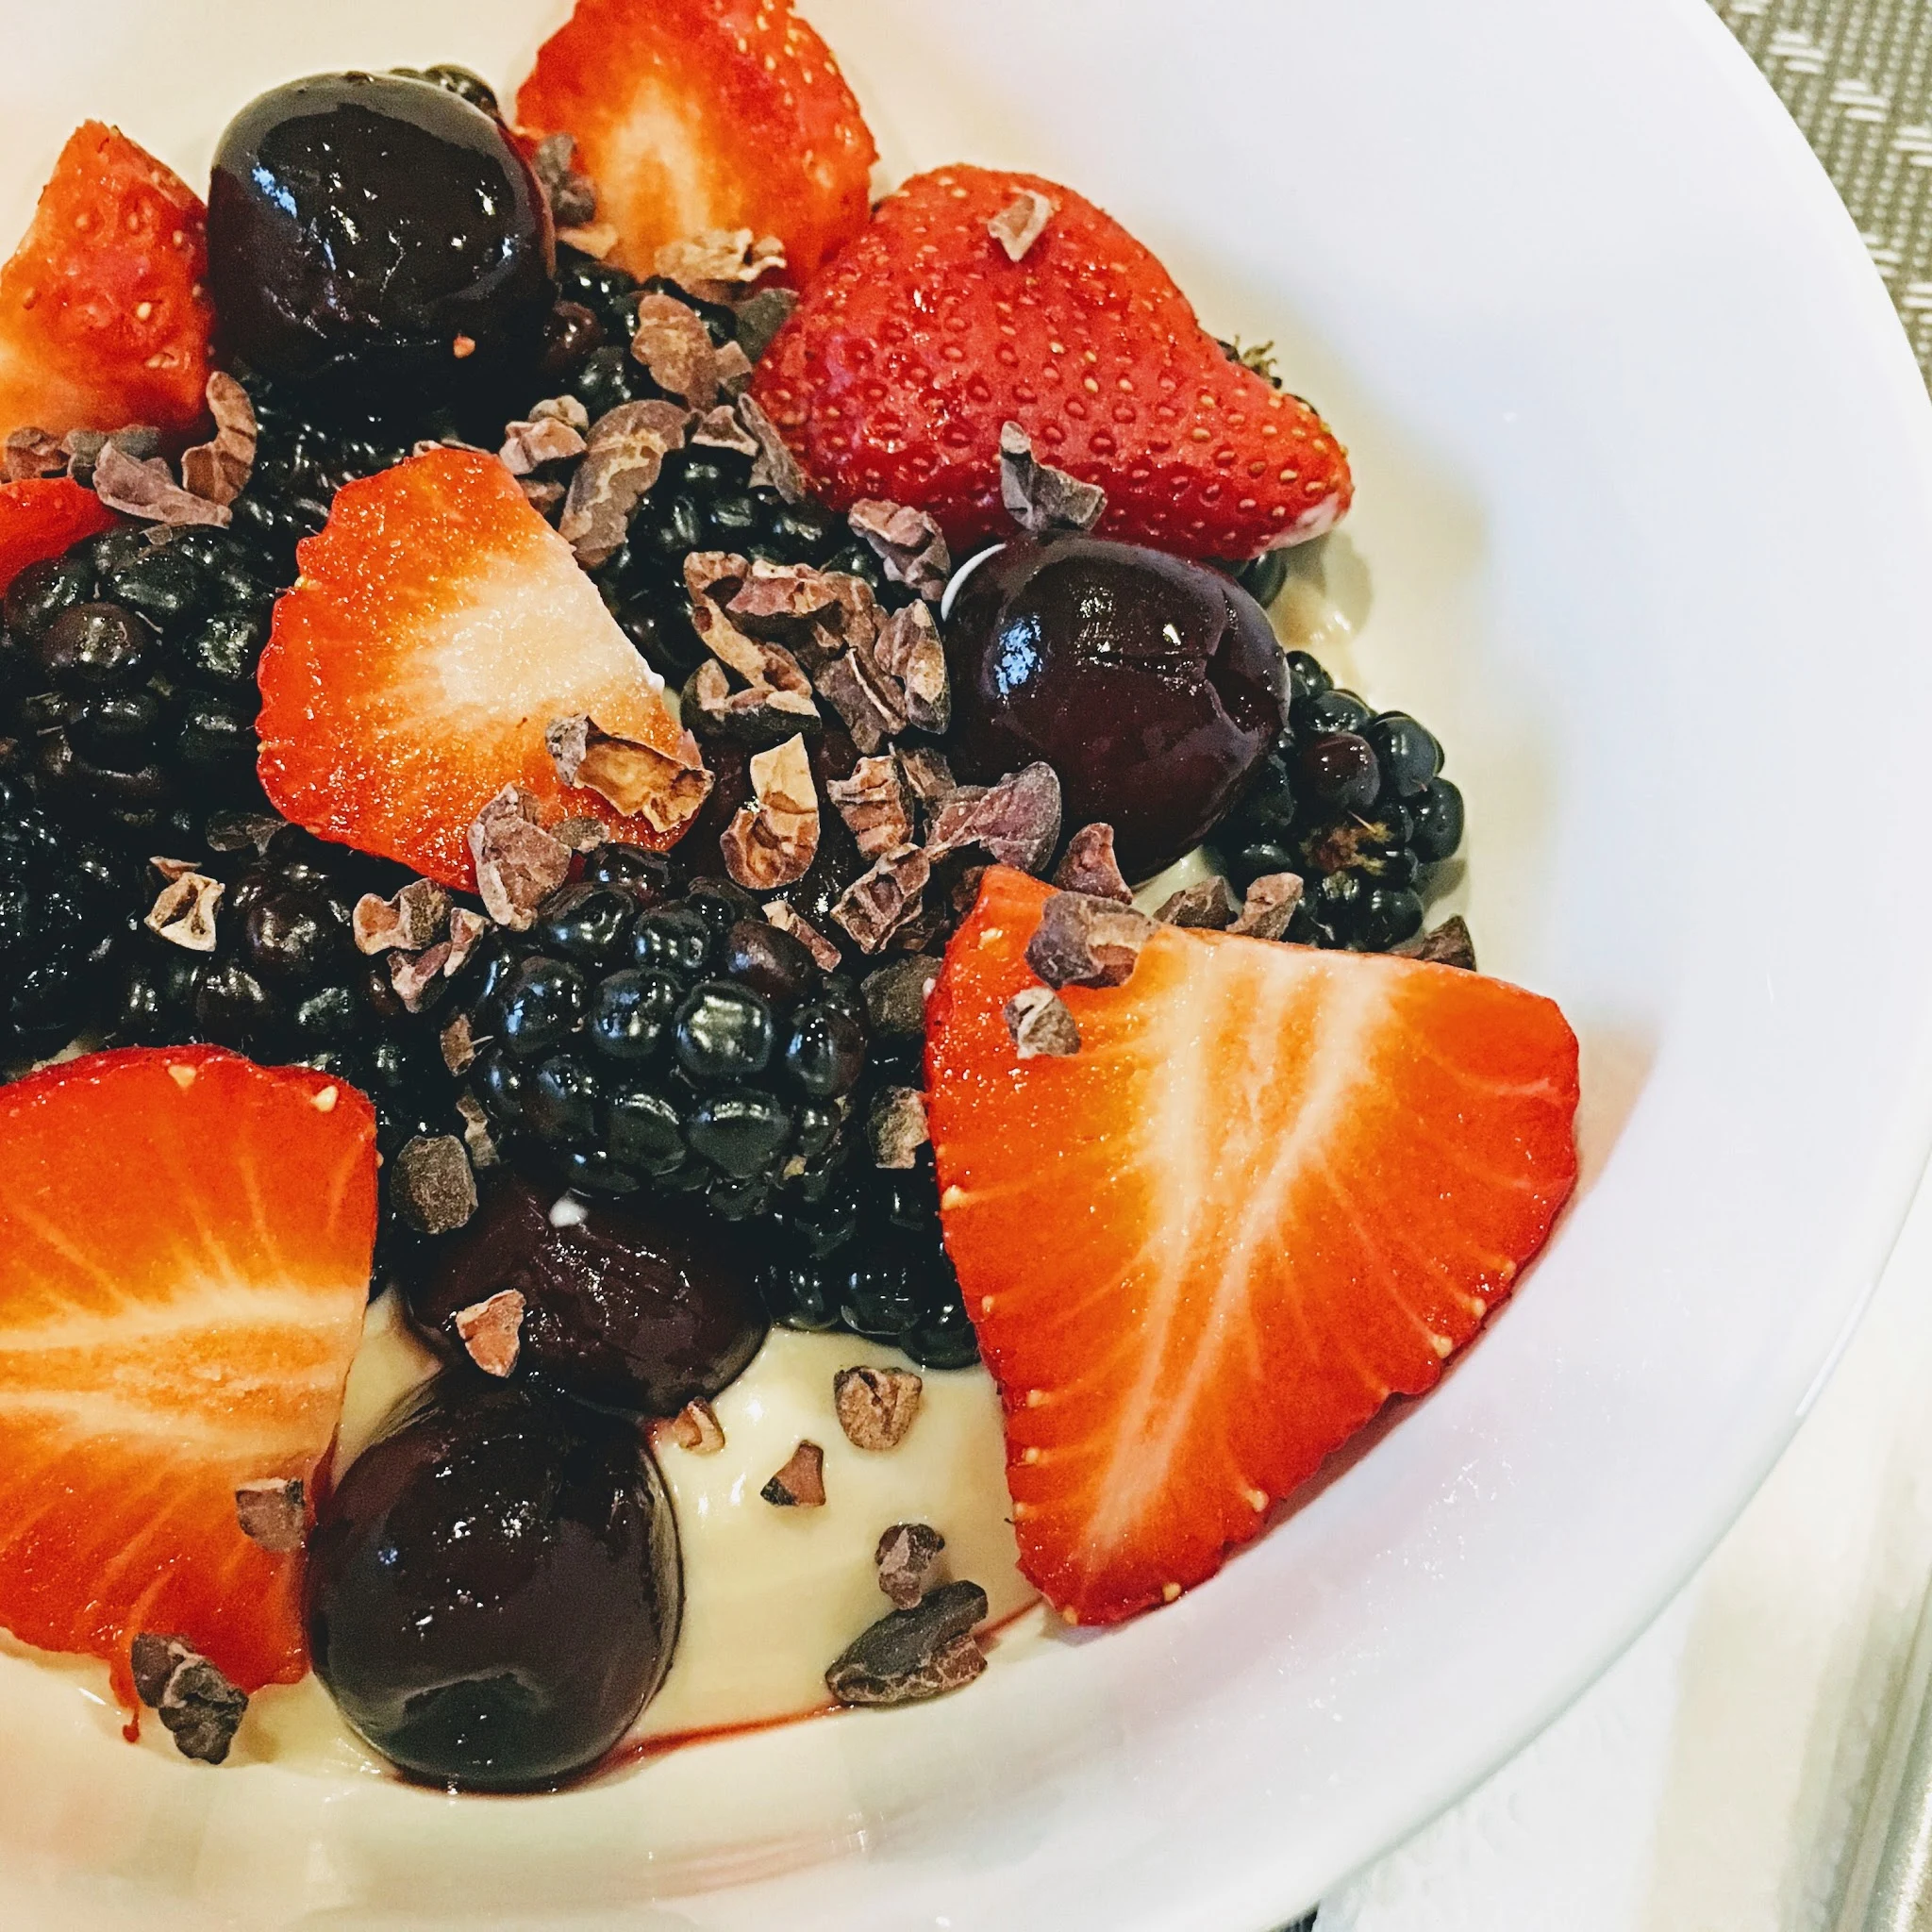 Quick and Healthy Breakfast with Greek Yogurt, Fresh Fruit and Cacao Nibs.  Decadent and delicious, full of healthy nutrients and protein. | www.livingyoungandhealthy.com